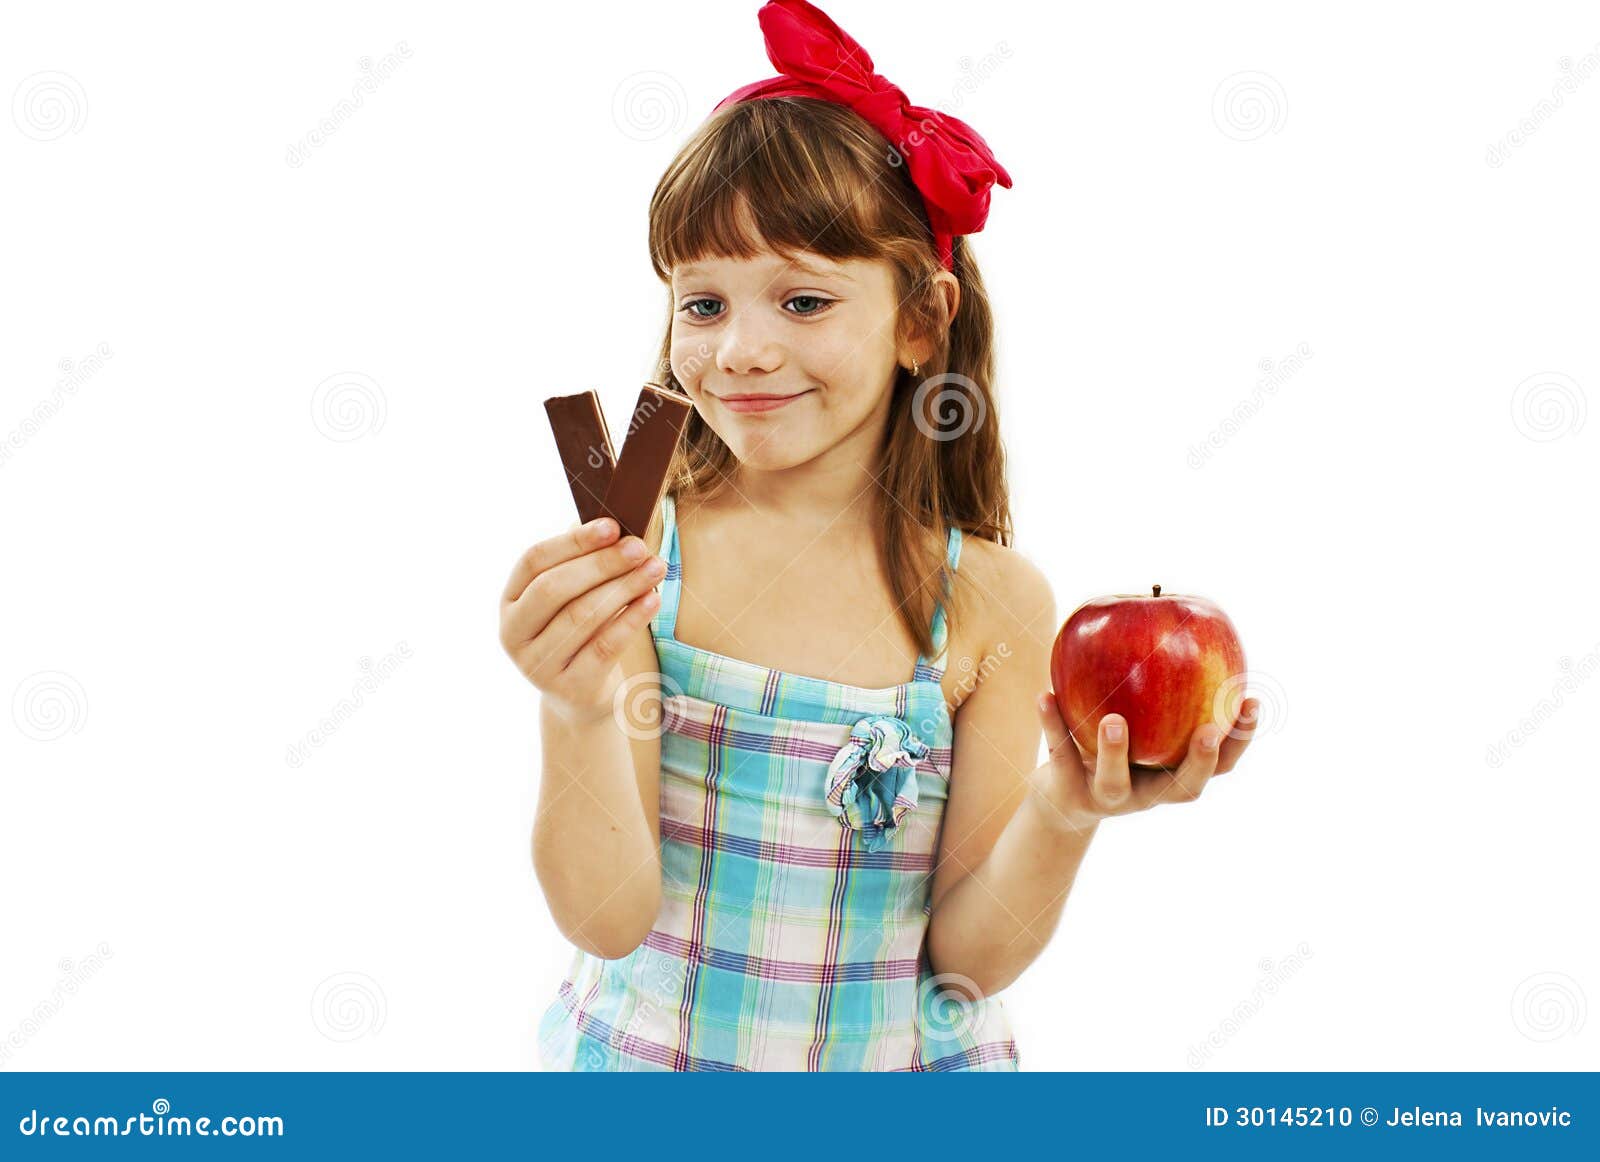 Healthy diet choices - little girl with apple and chocolate. Isolated ...